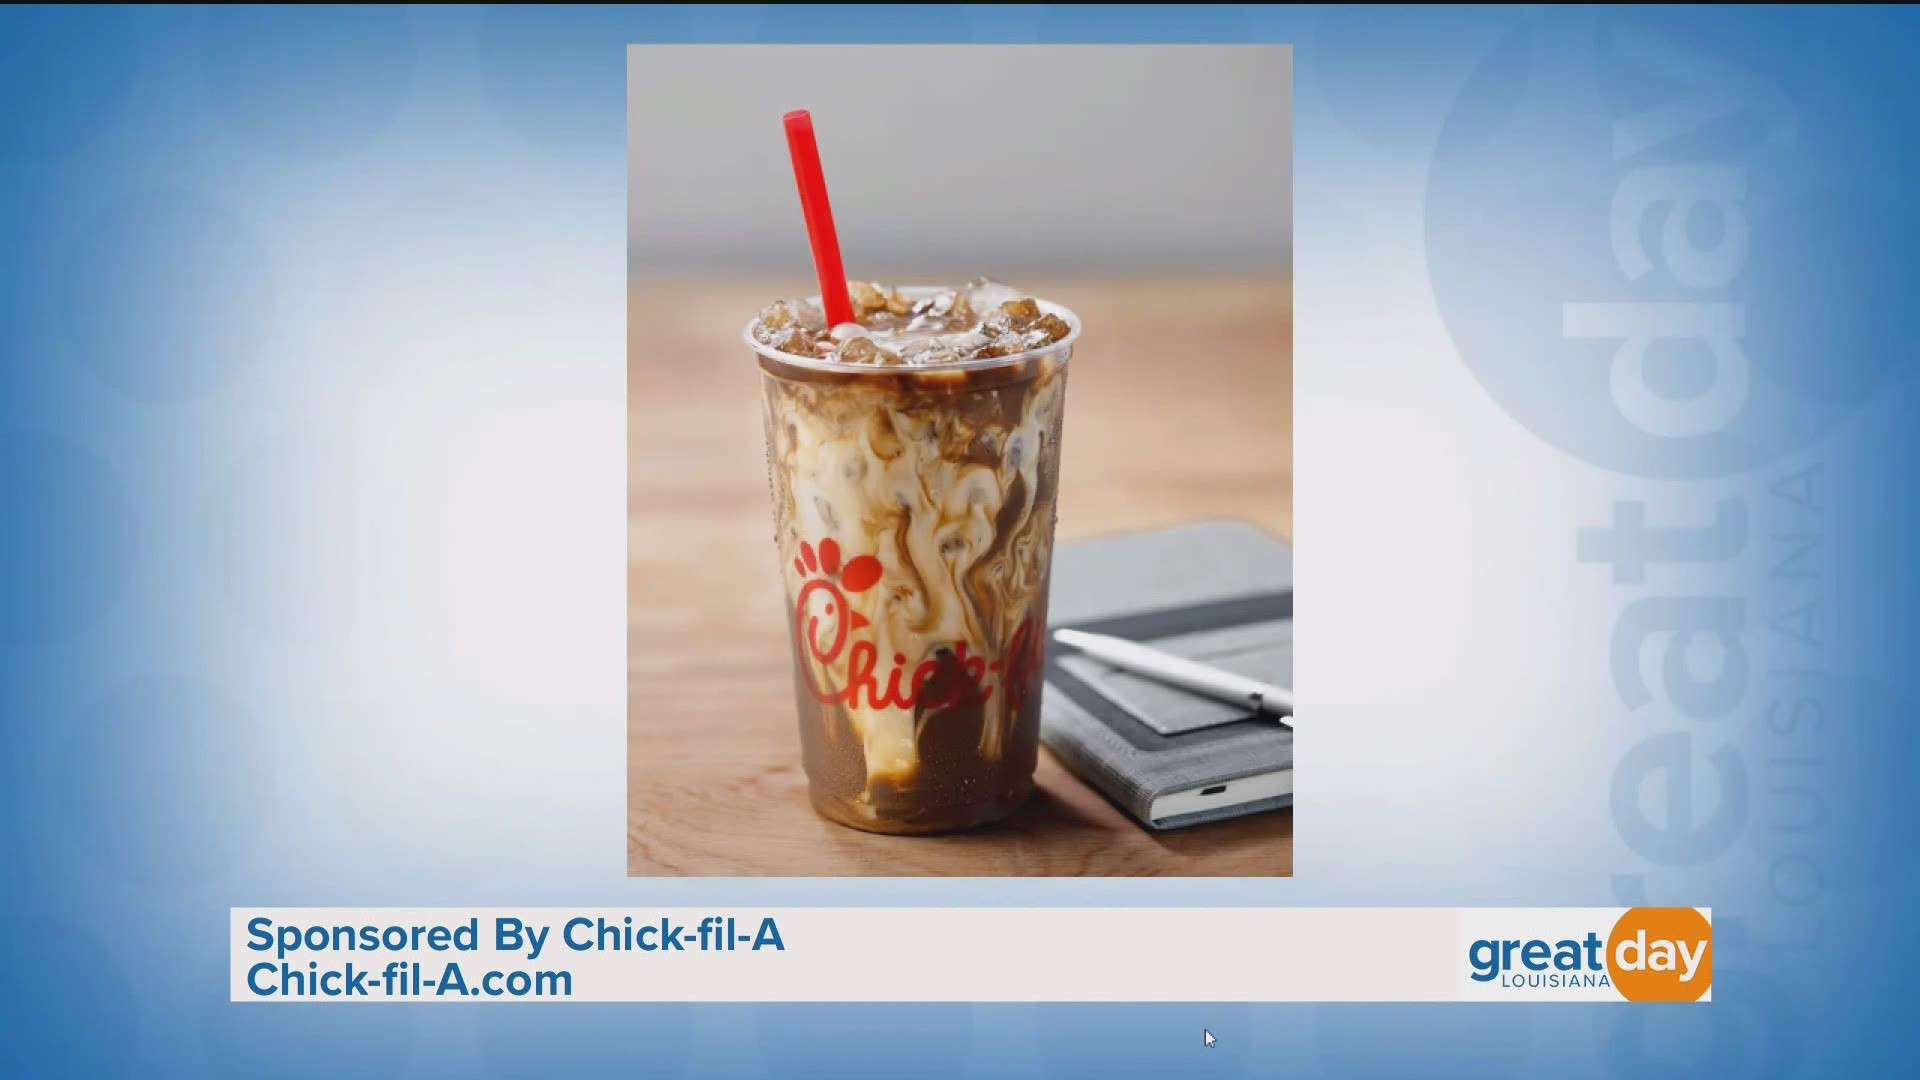 September 29 is National Coffee Day and to celebrate, Chick-fil-A highlights their new coffee blends, flavors, and drinks.